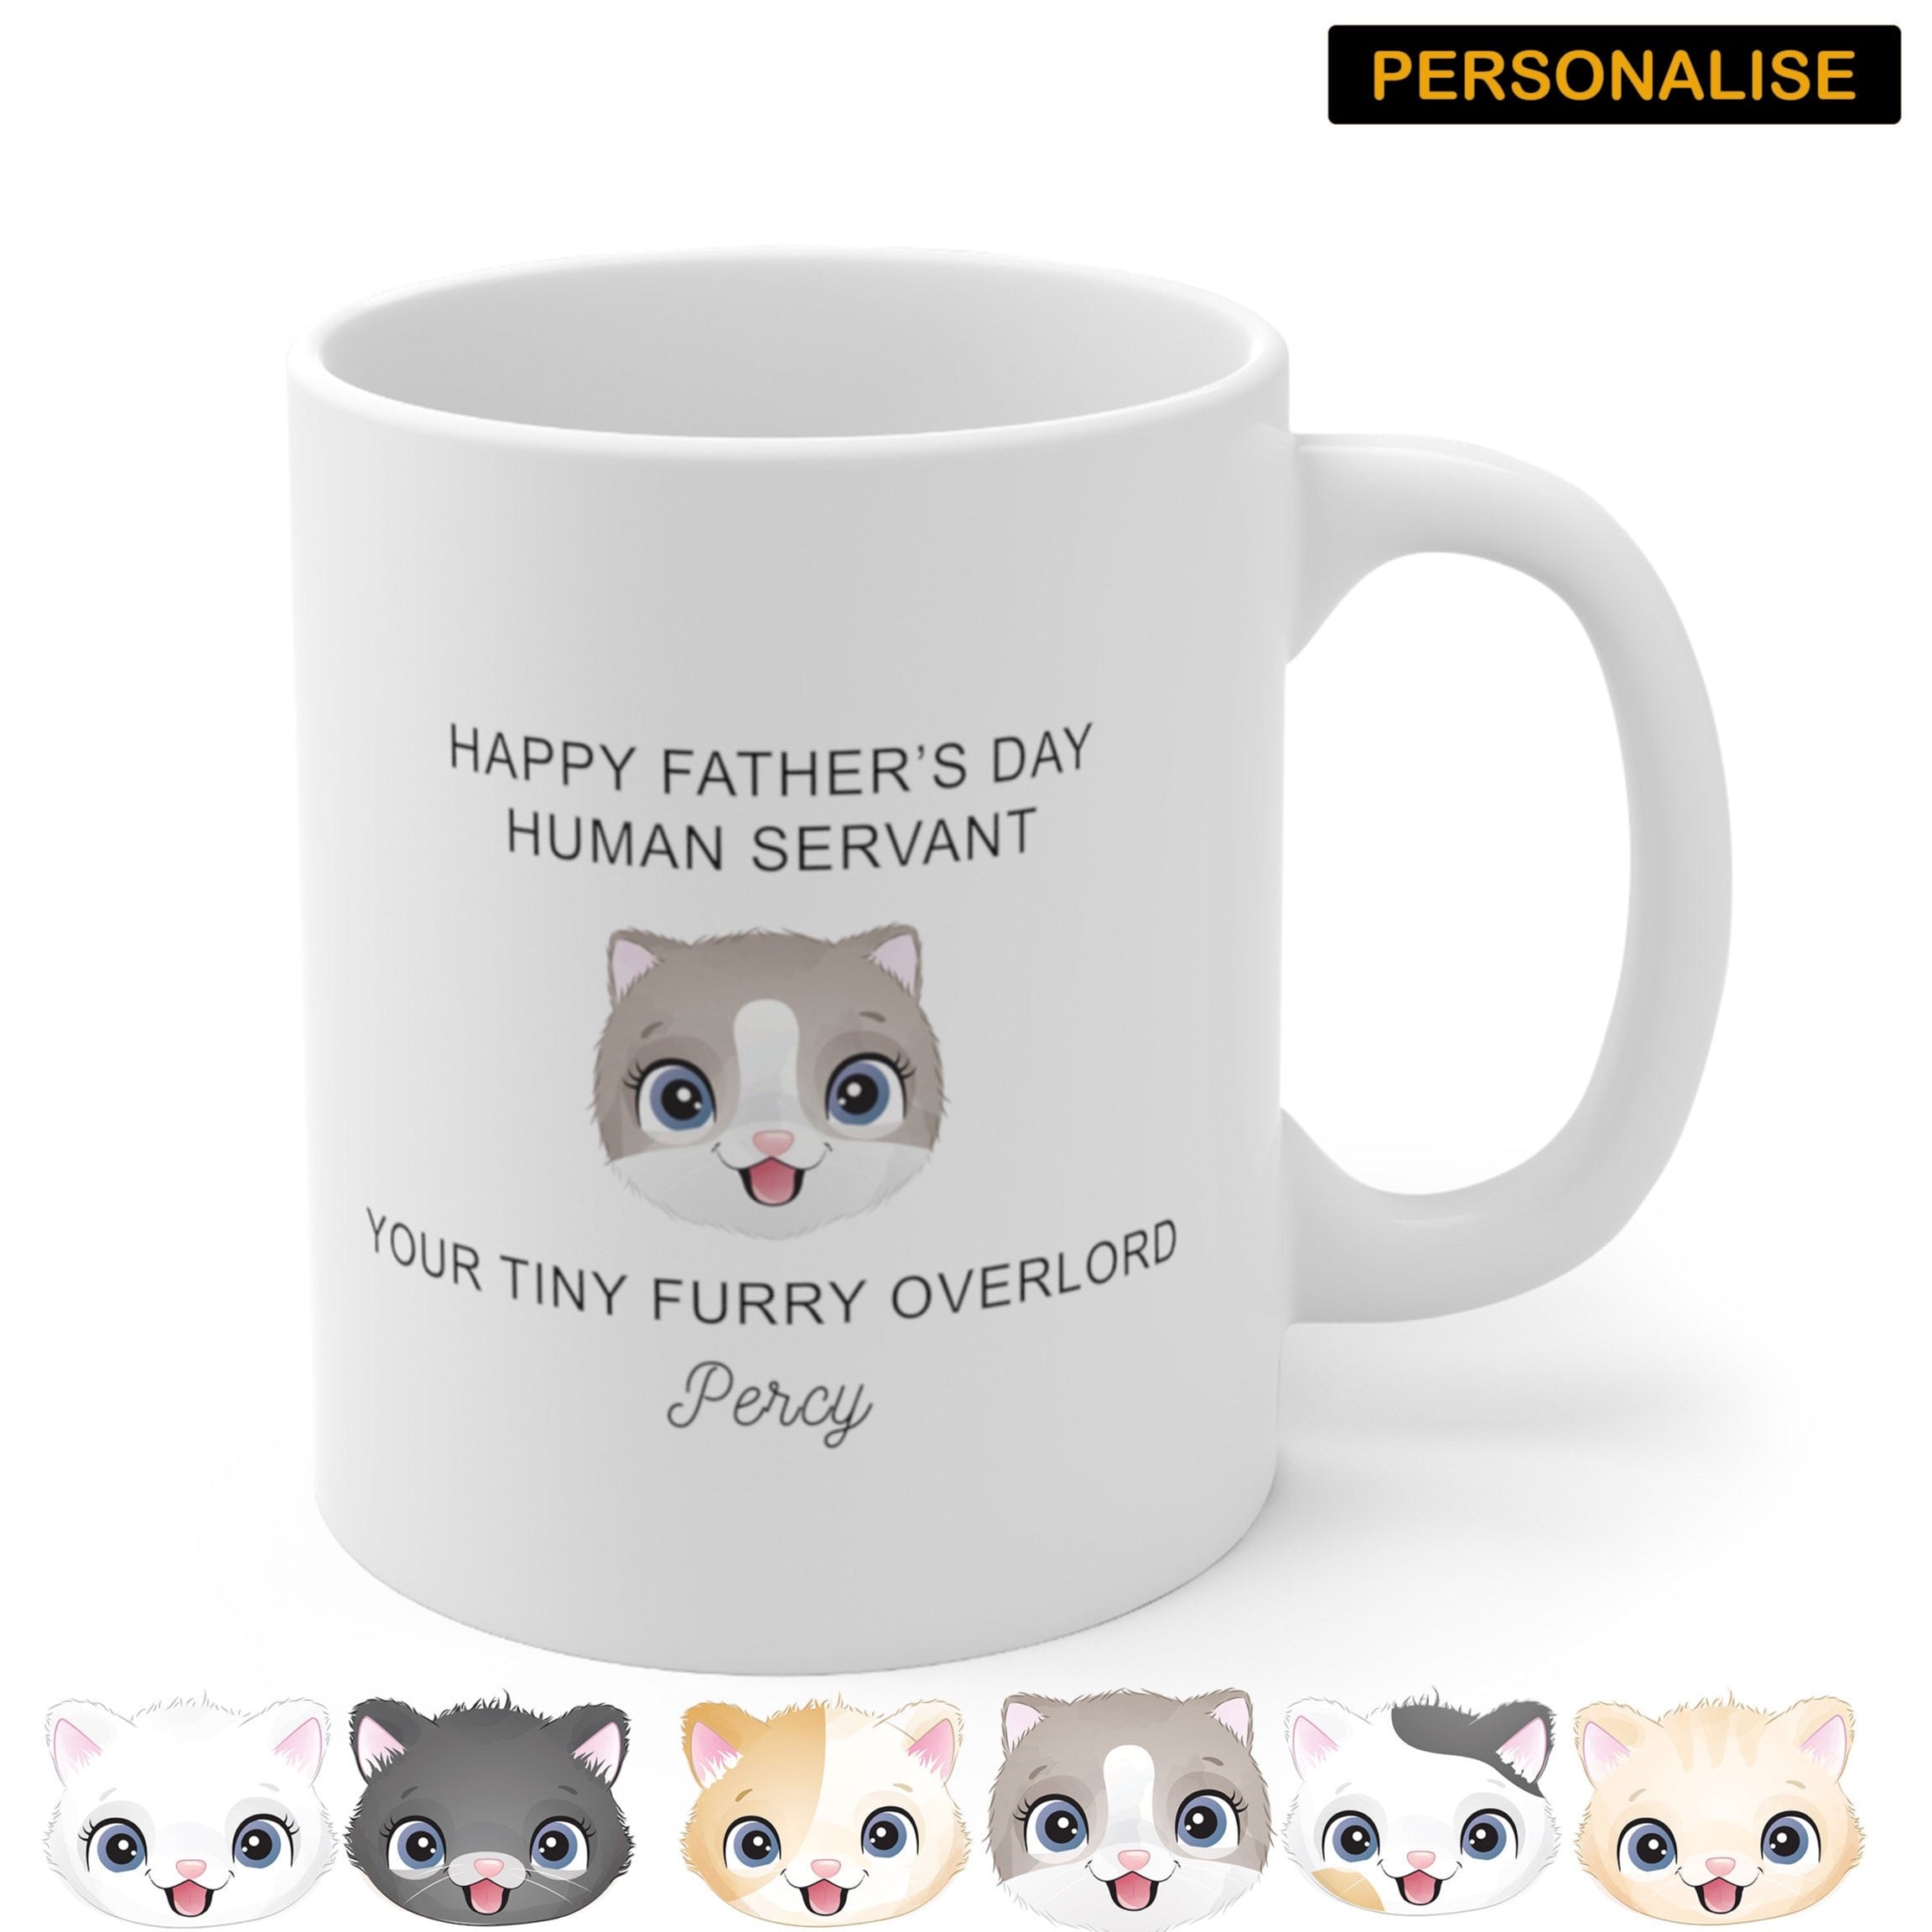 HUMAN SERVANT FATHER'S DAY